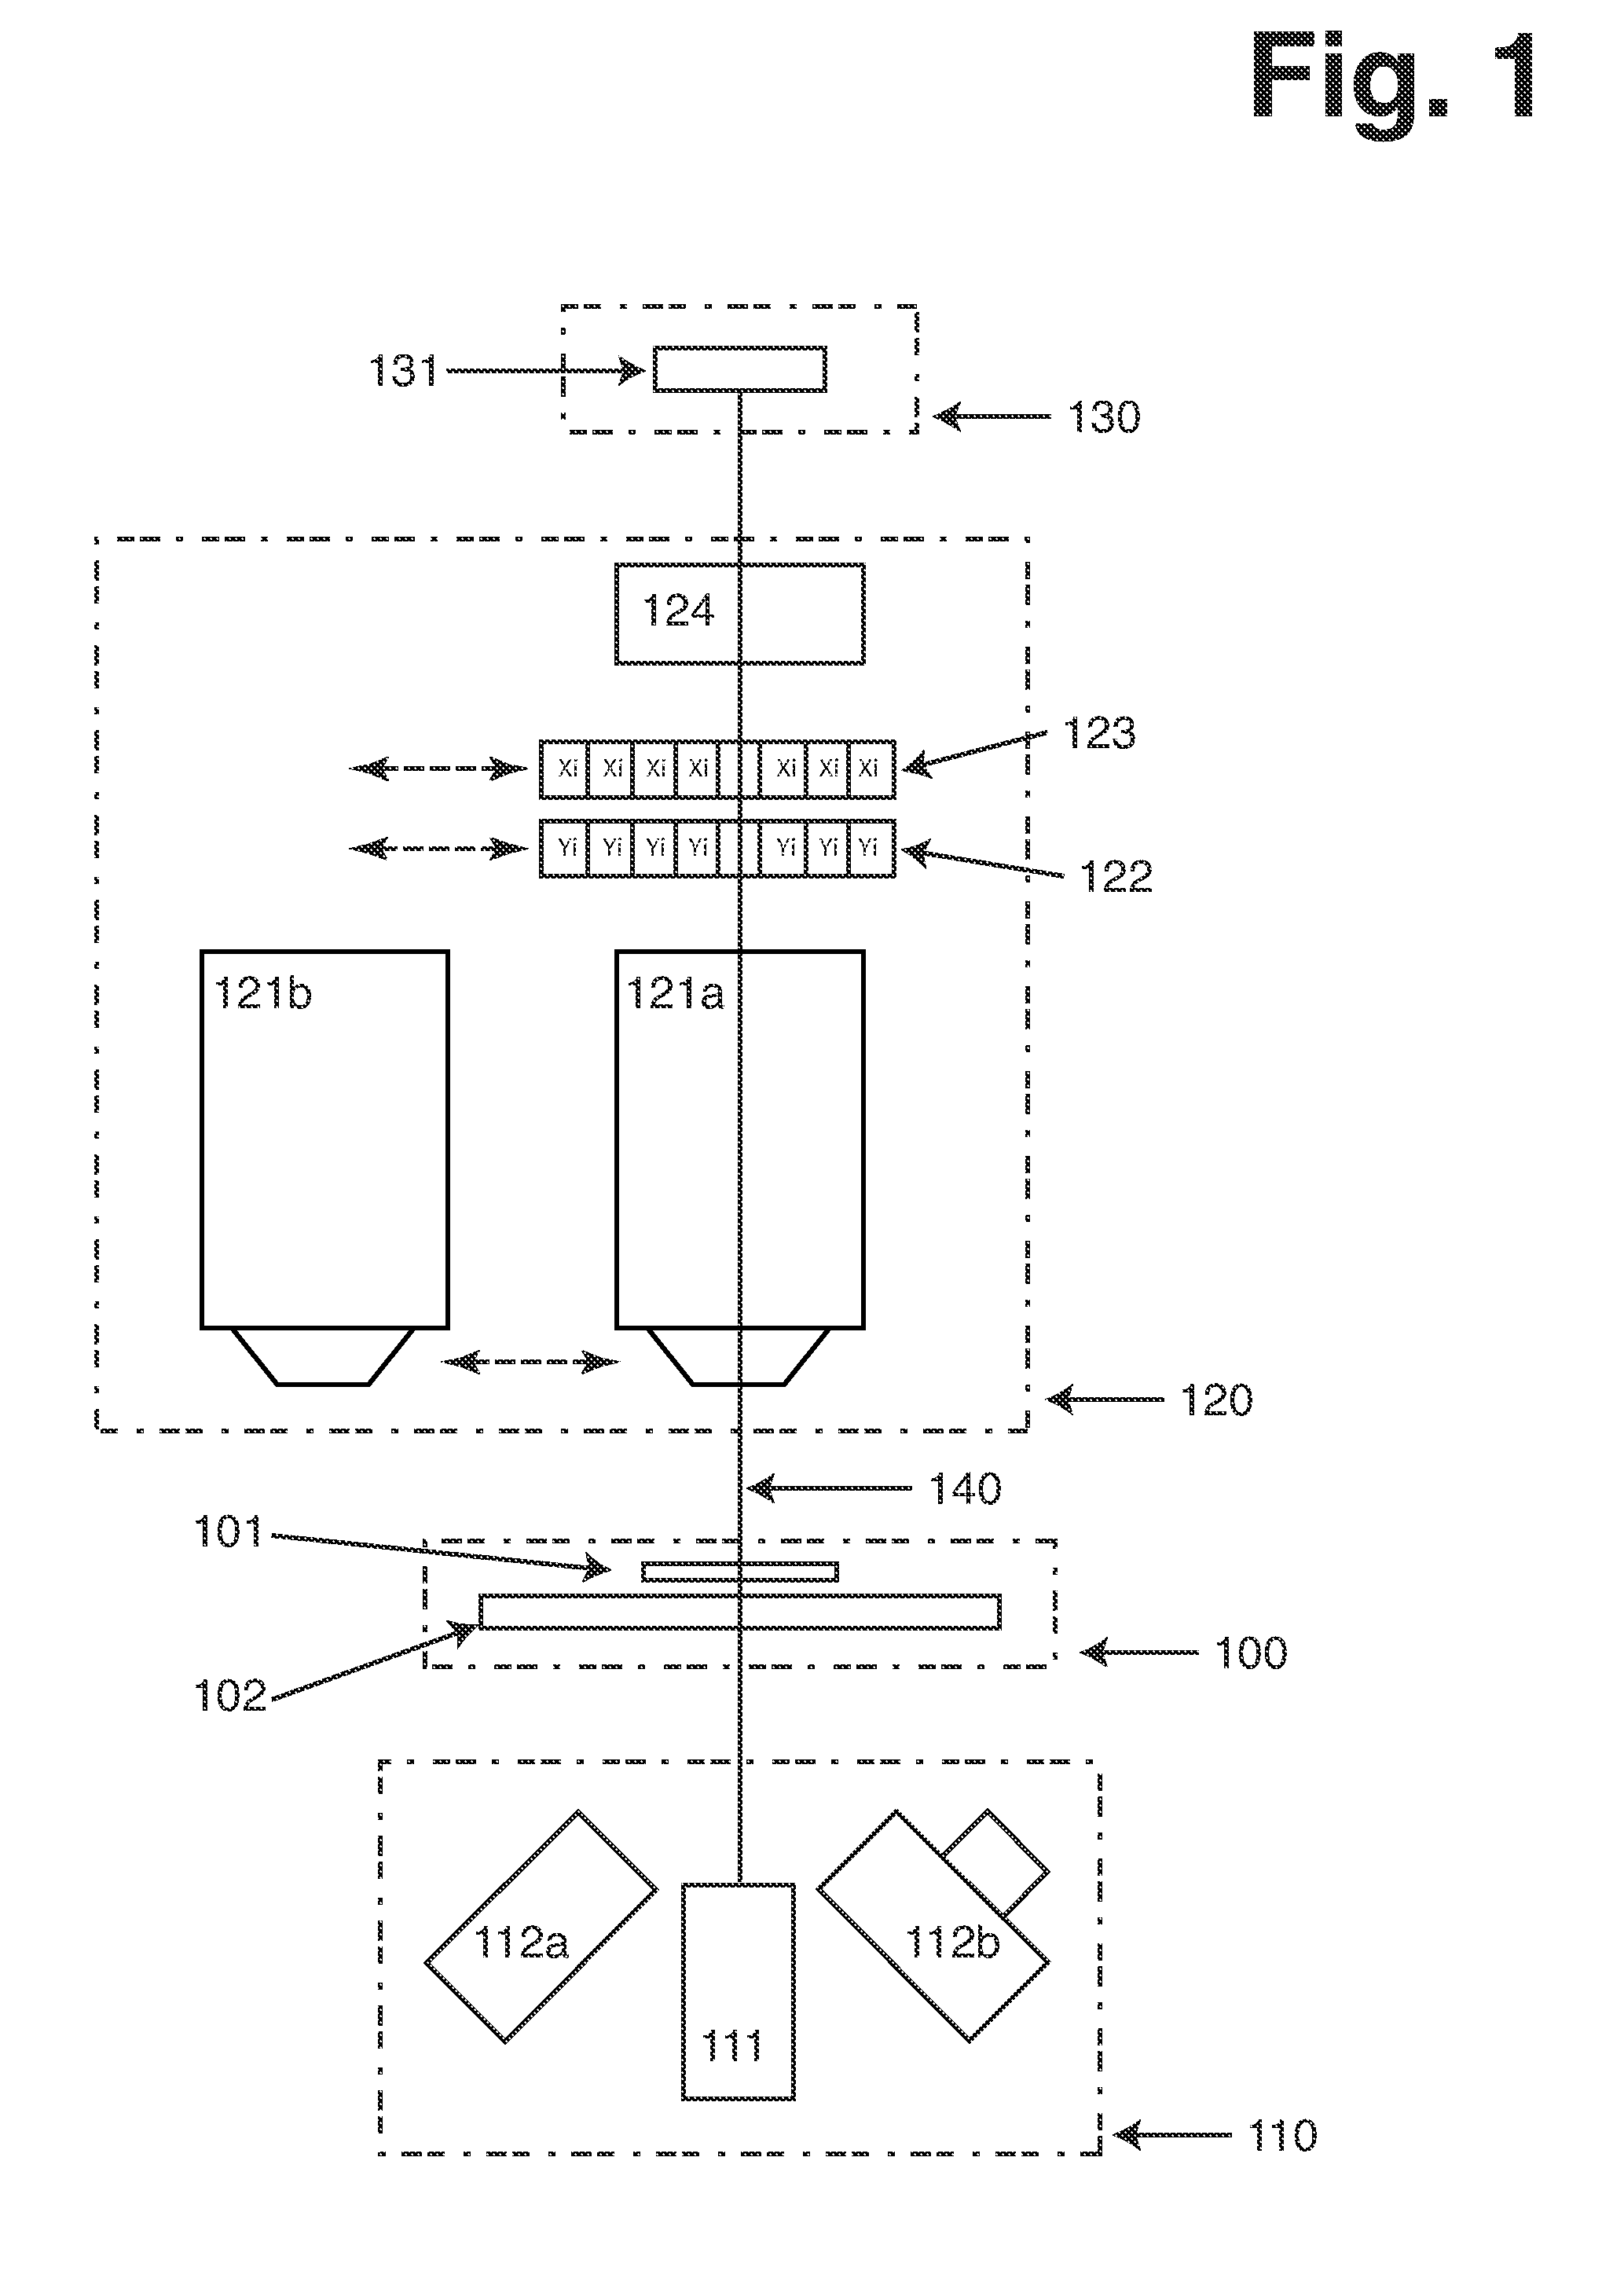 Image forming cytometer